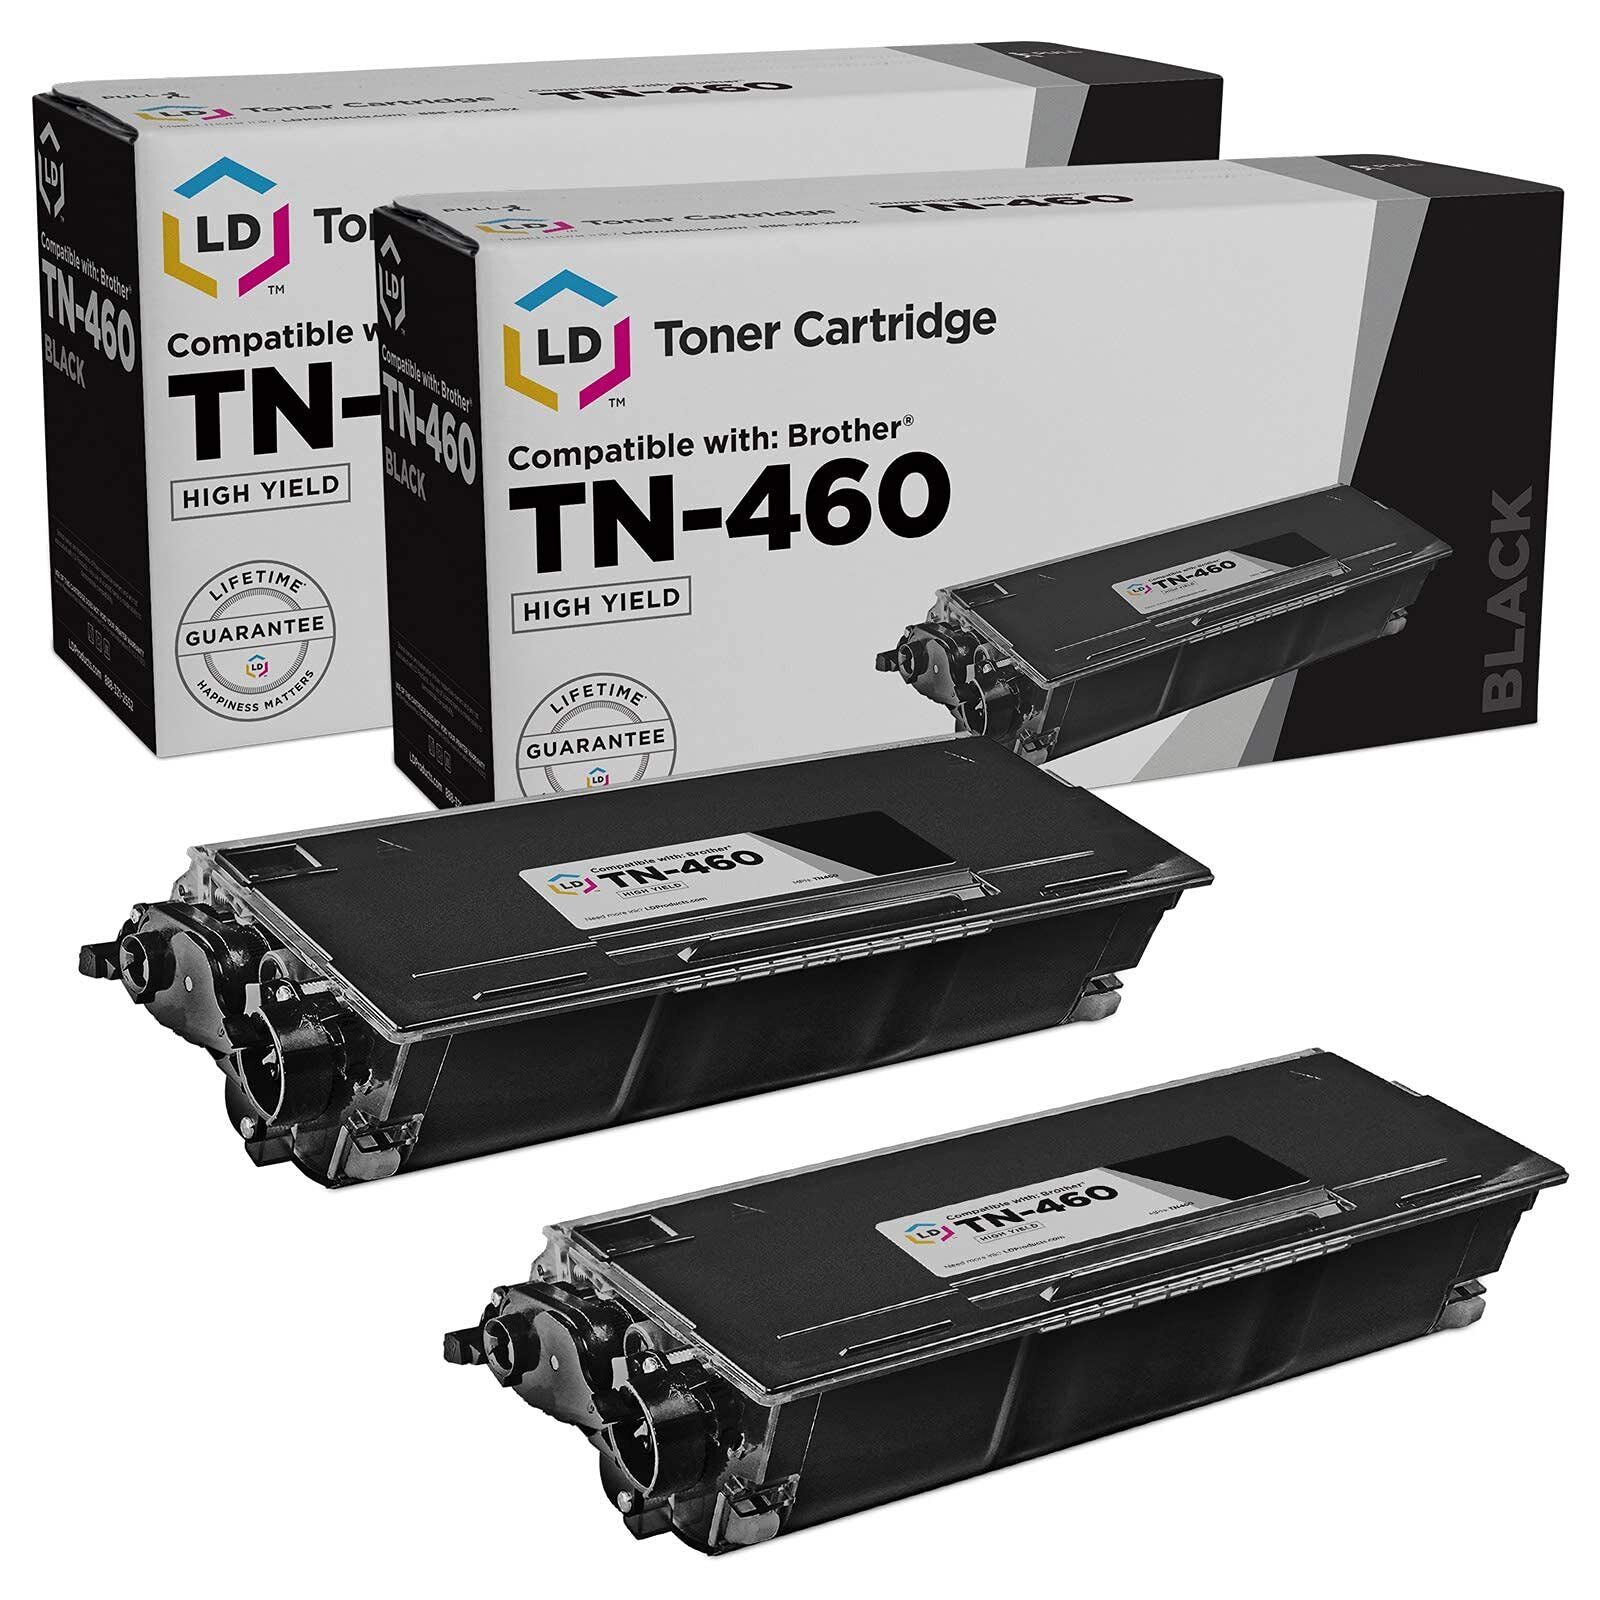 LD Compatible Replacements for Brother TN460 Pack of 2 High Yield Black Toners